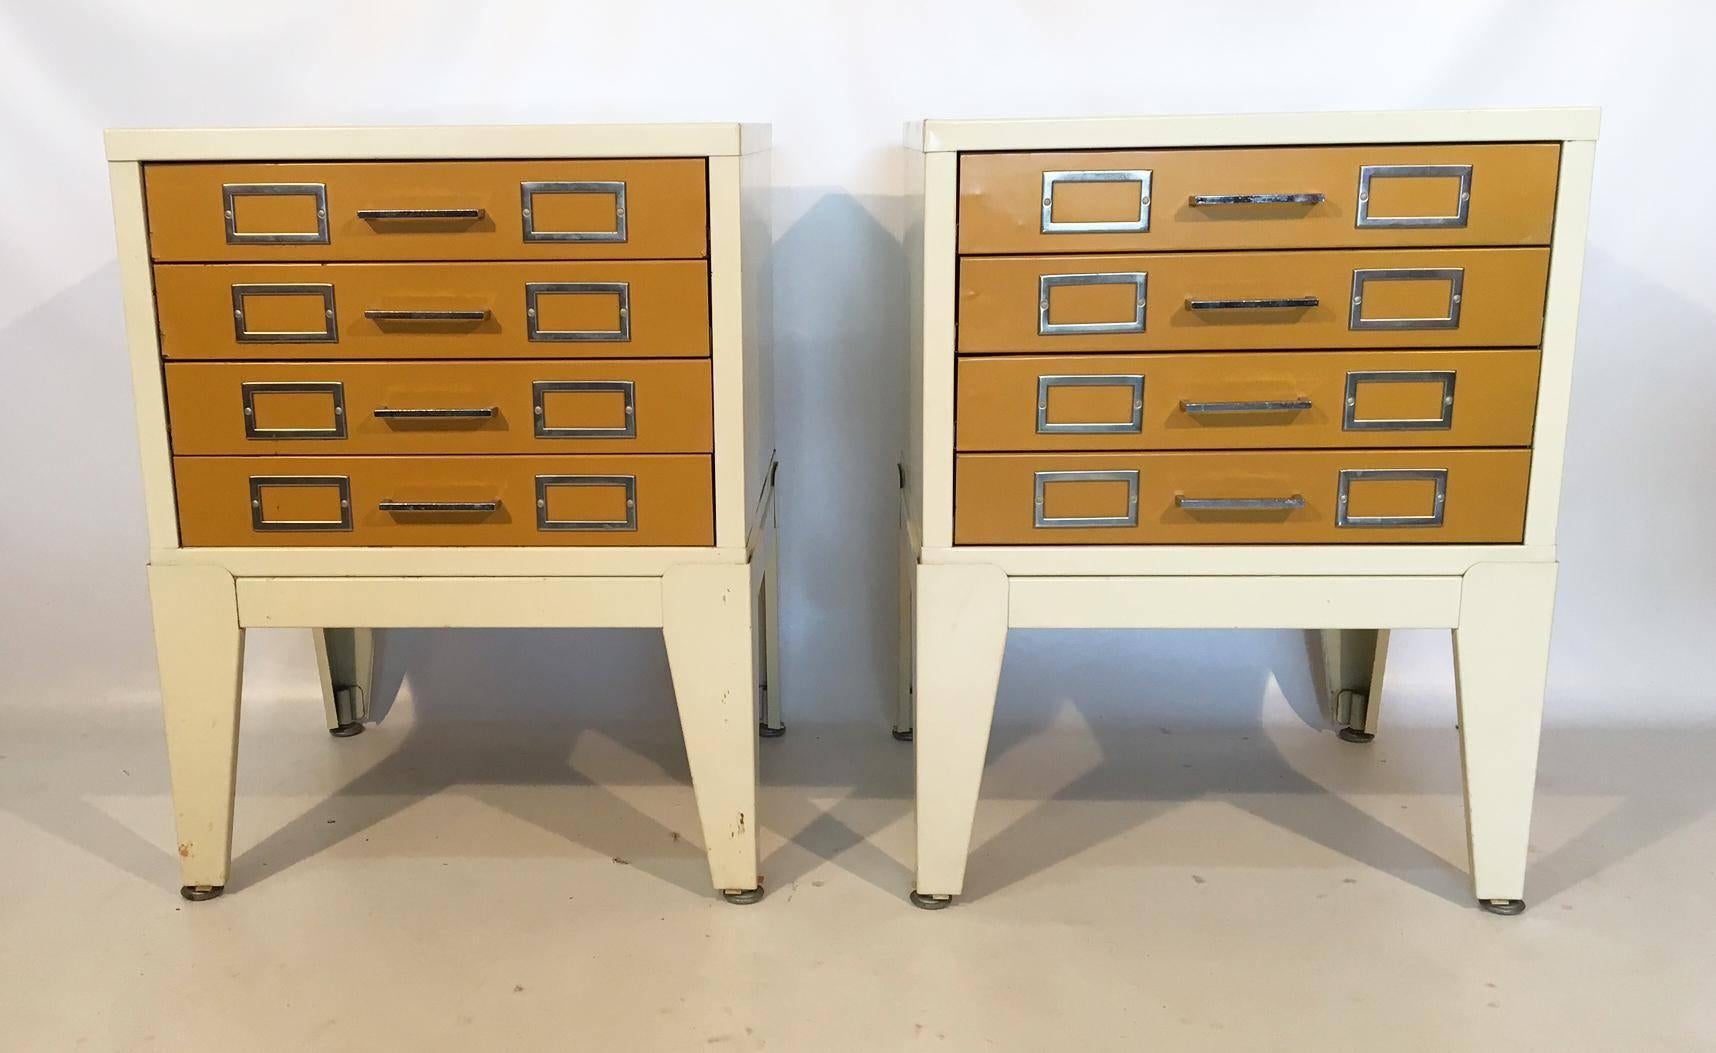 Pair of vintage metal cabinet nightstands featuring four drawers and all-steel construction. Excellent vintage condition with only minor abrasions from careful use.